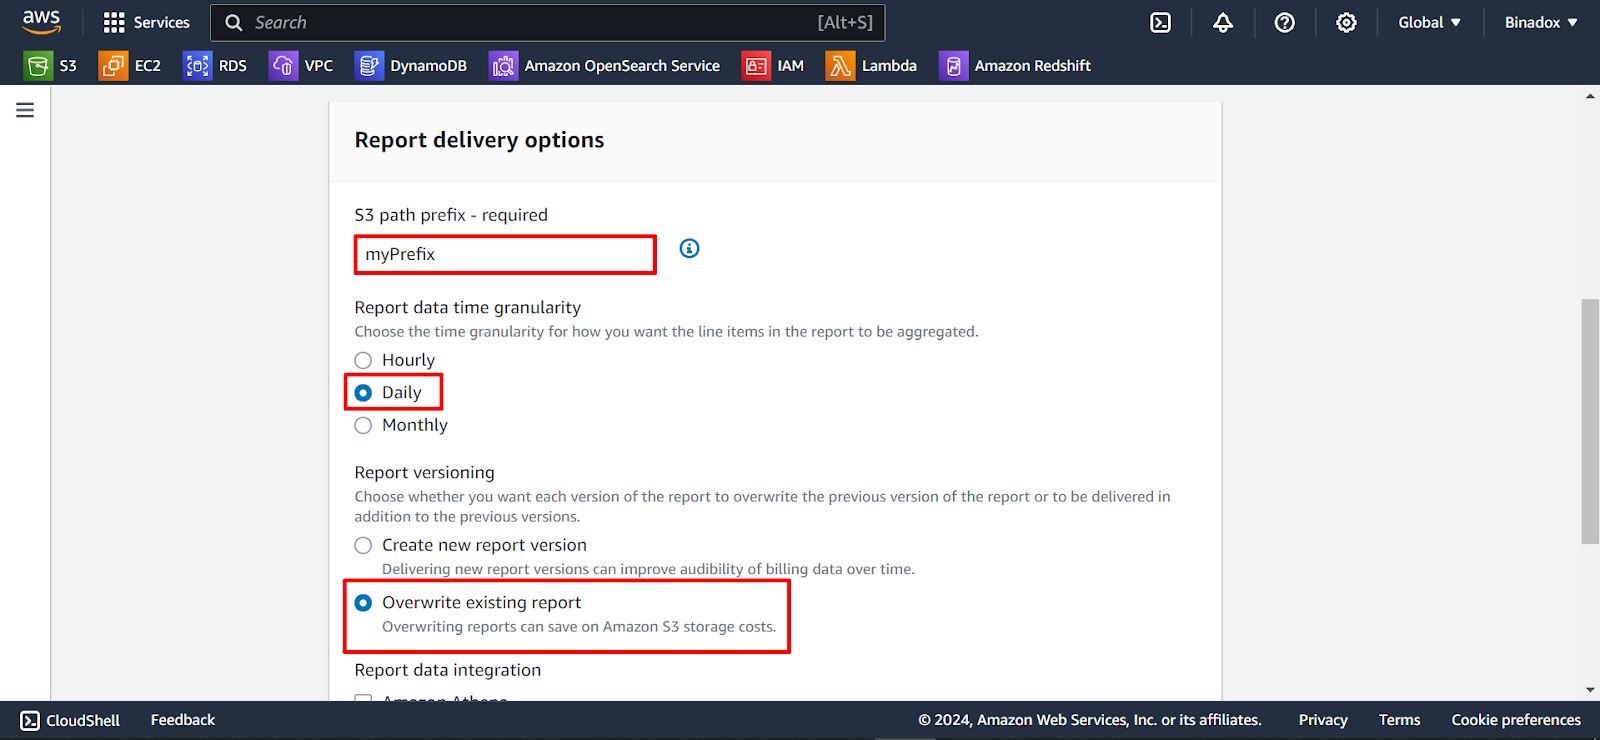 Report delivery options
